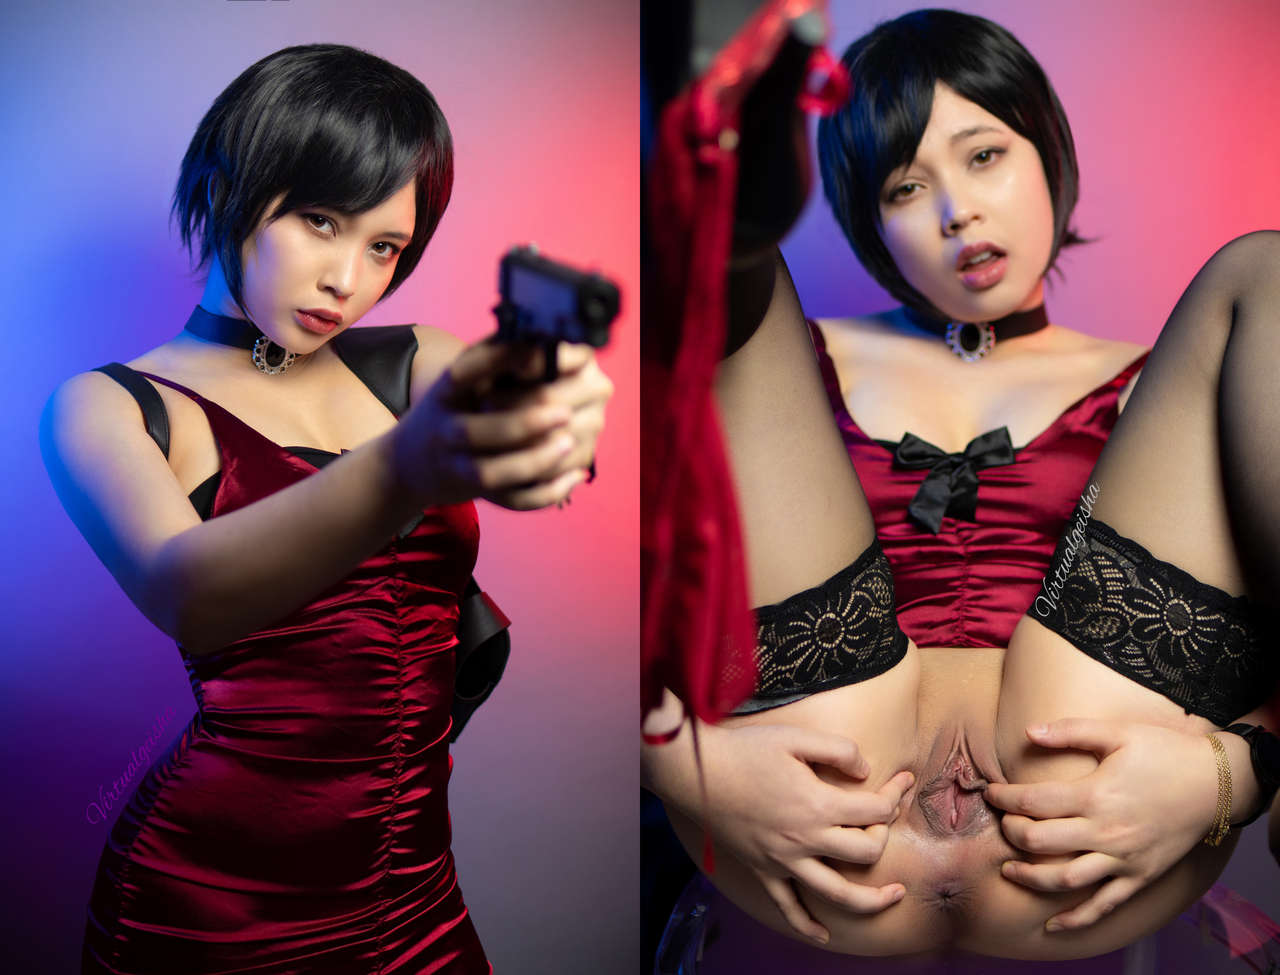 Ada Wong From Resident Evil In Two Different Modes By Virtual Geisha Nude